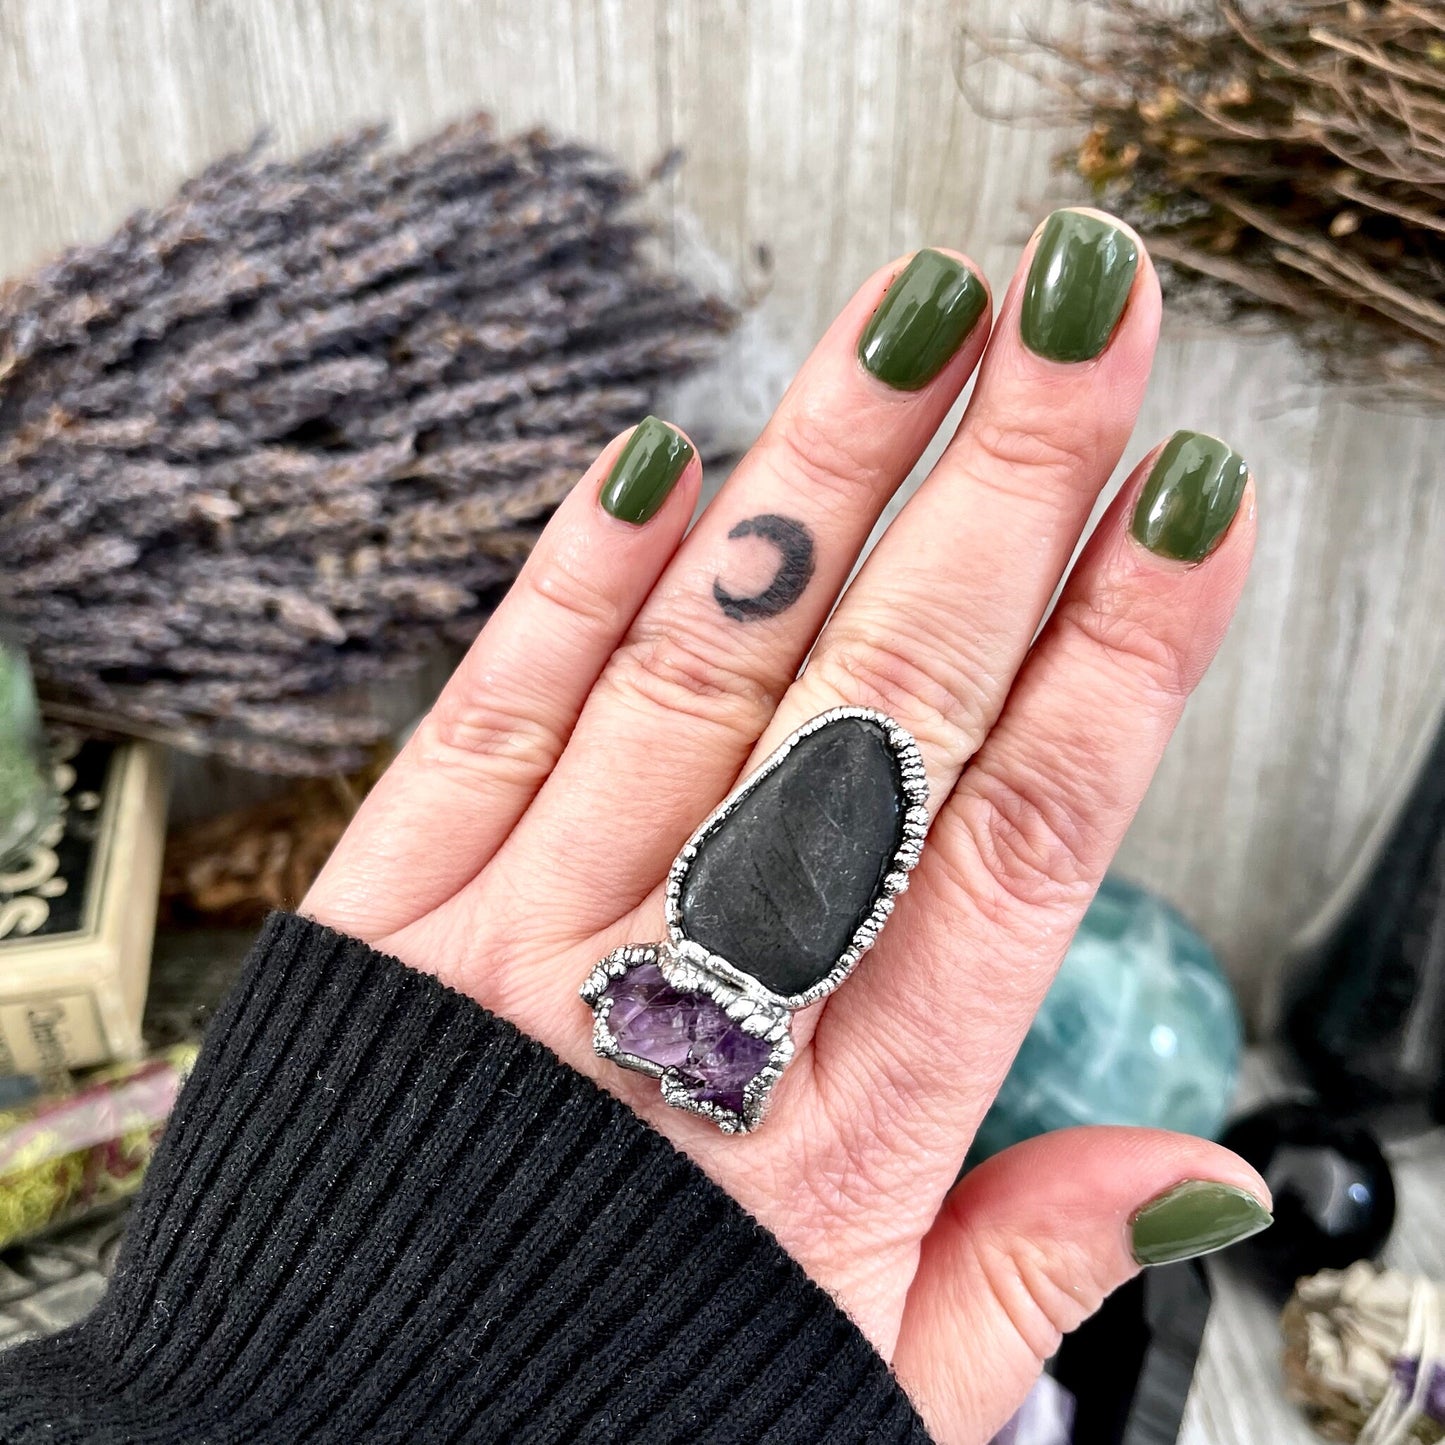 Size 8 Two Stone Ring-River Rock Purple Raw Amethyst Crystal Ring Fine Silver / Foxlark Collection - One of a Kind / Statement Jewelry